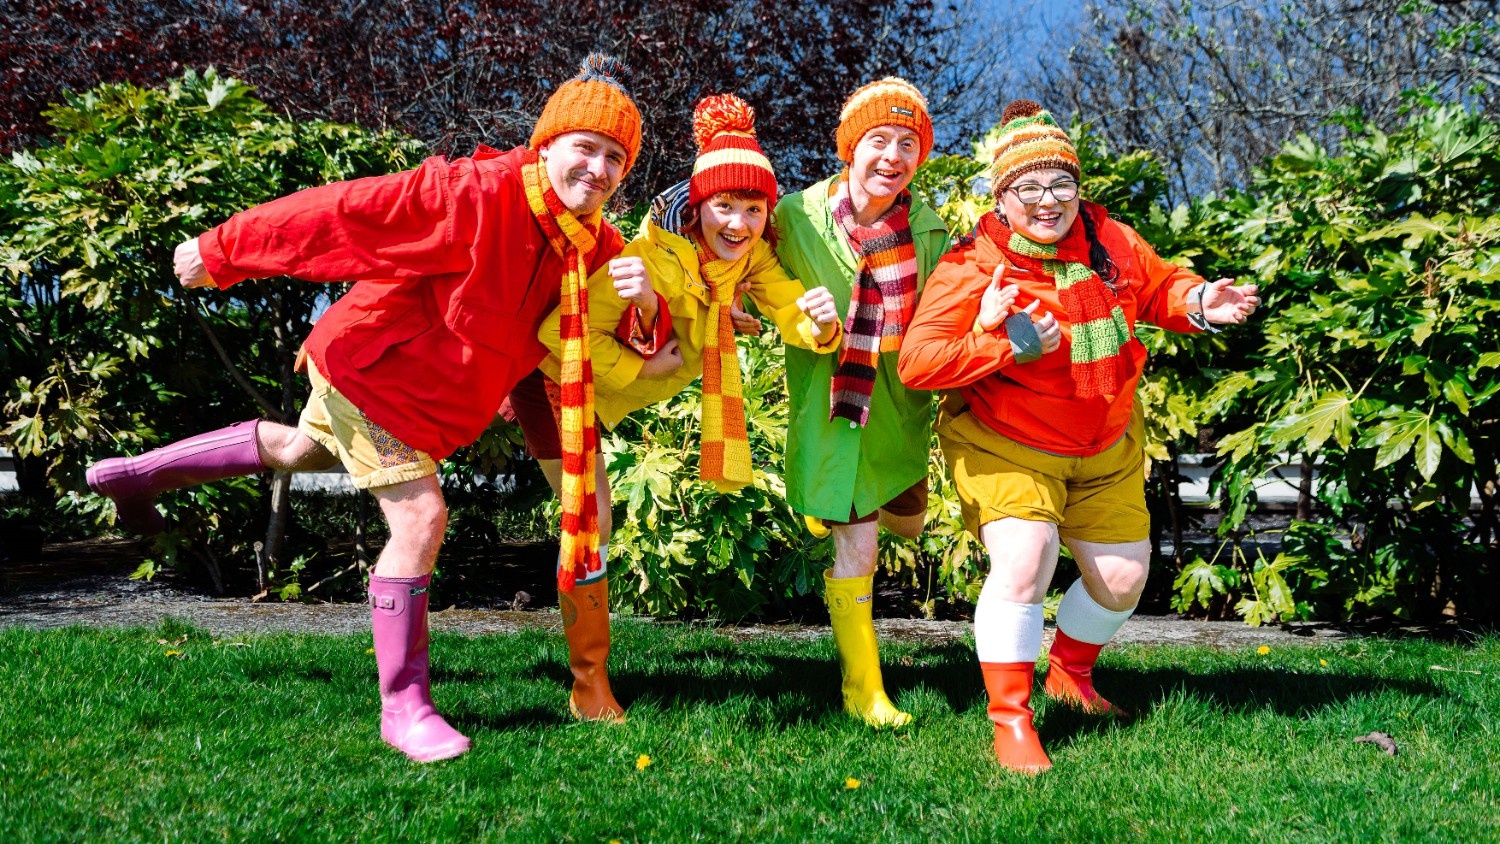 A group of four people wear colorful hats, scarves, jackets, shorts and wellies. They stand arm in arm, with three of them standing on one leg, outside in front of grass and bushes.